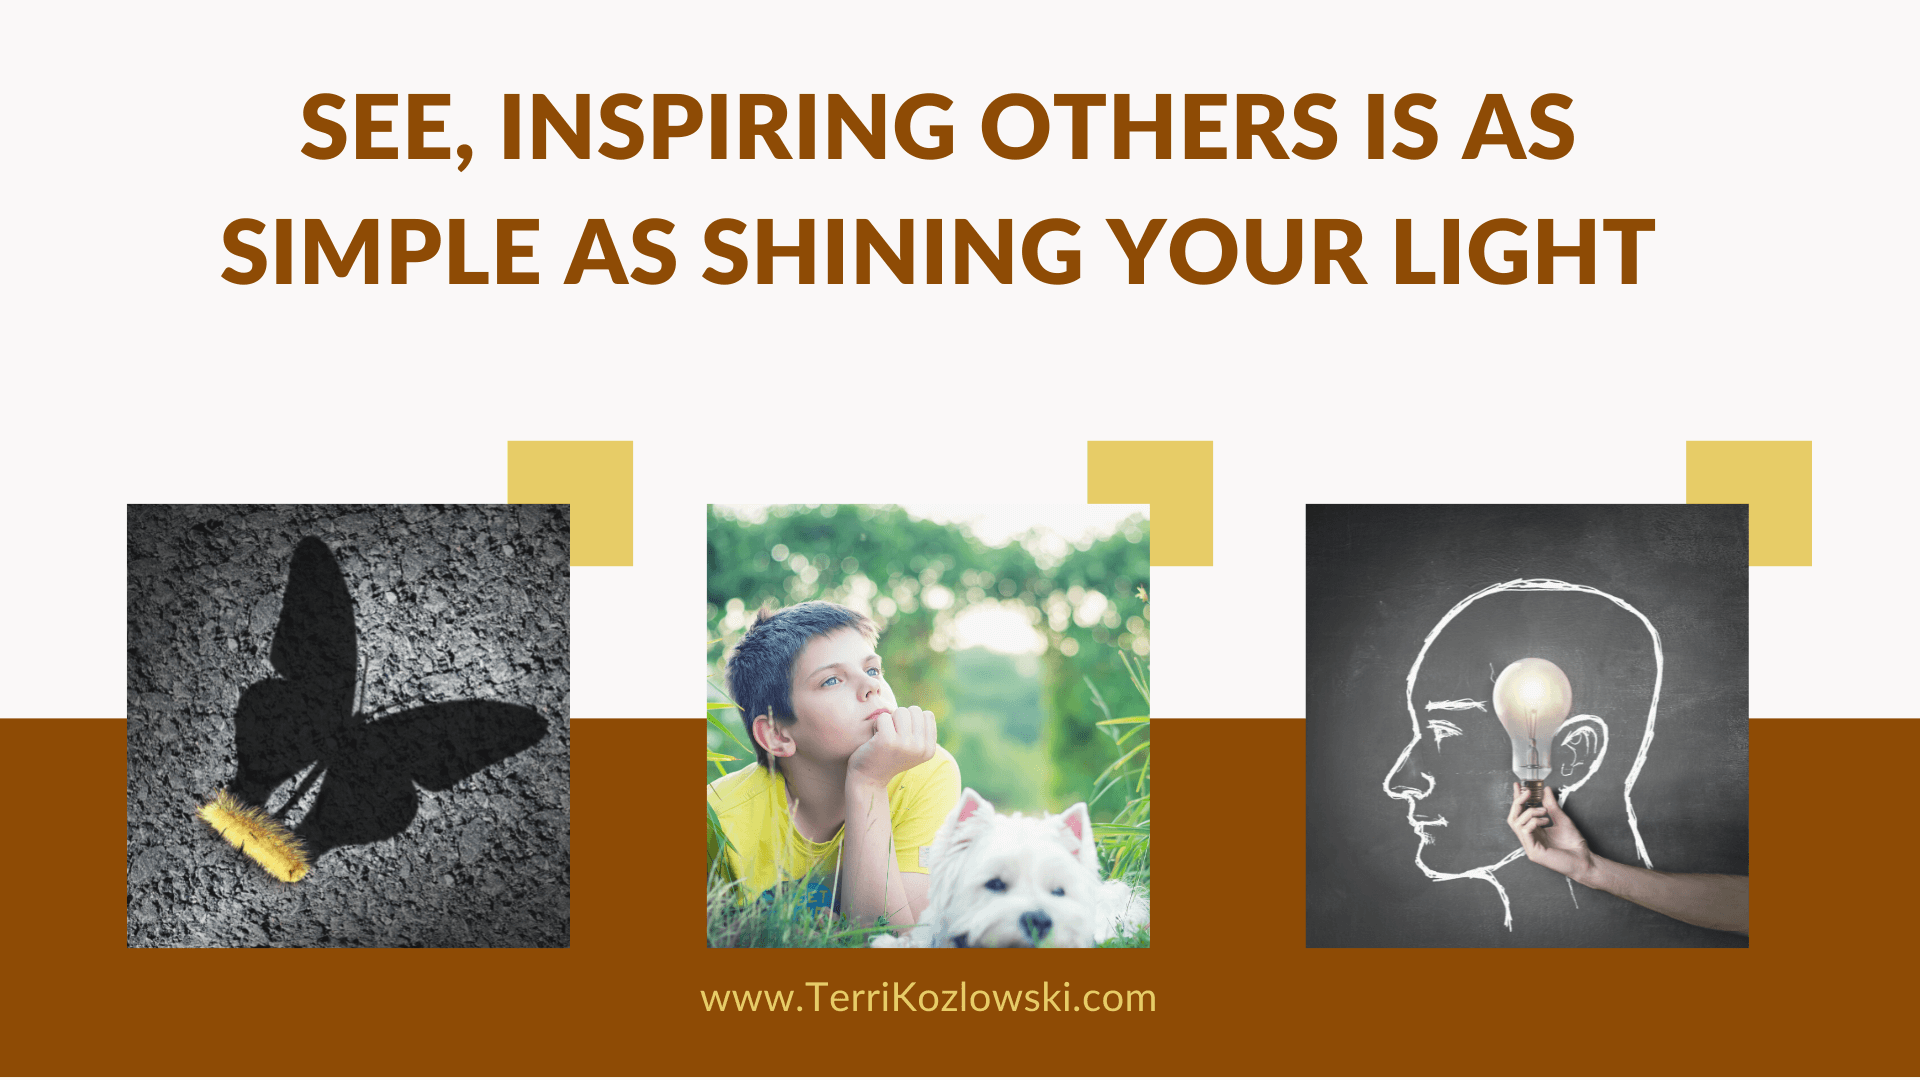 shining your light inspires others